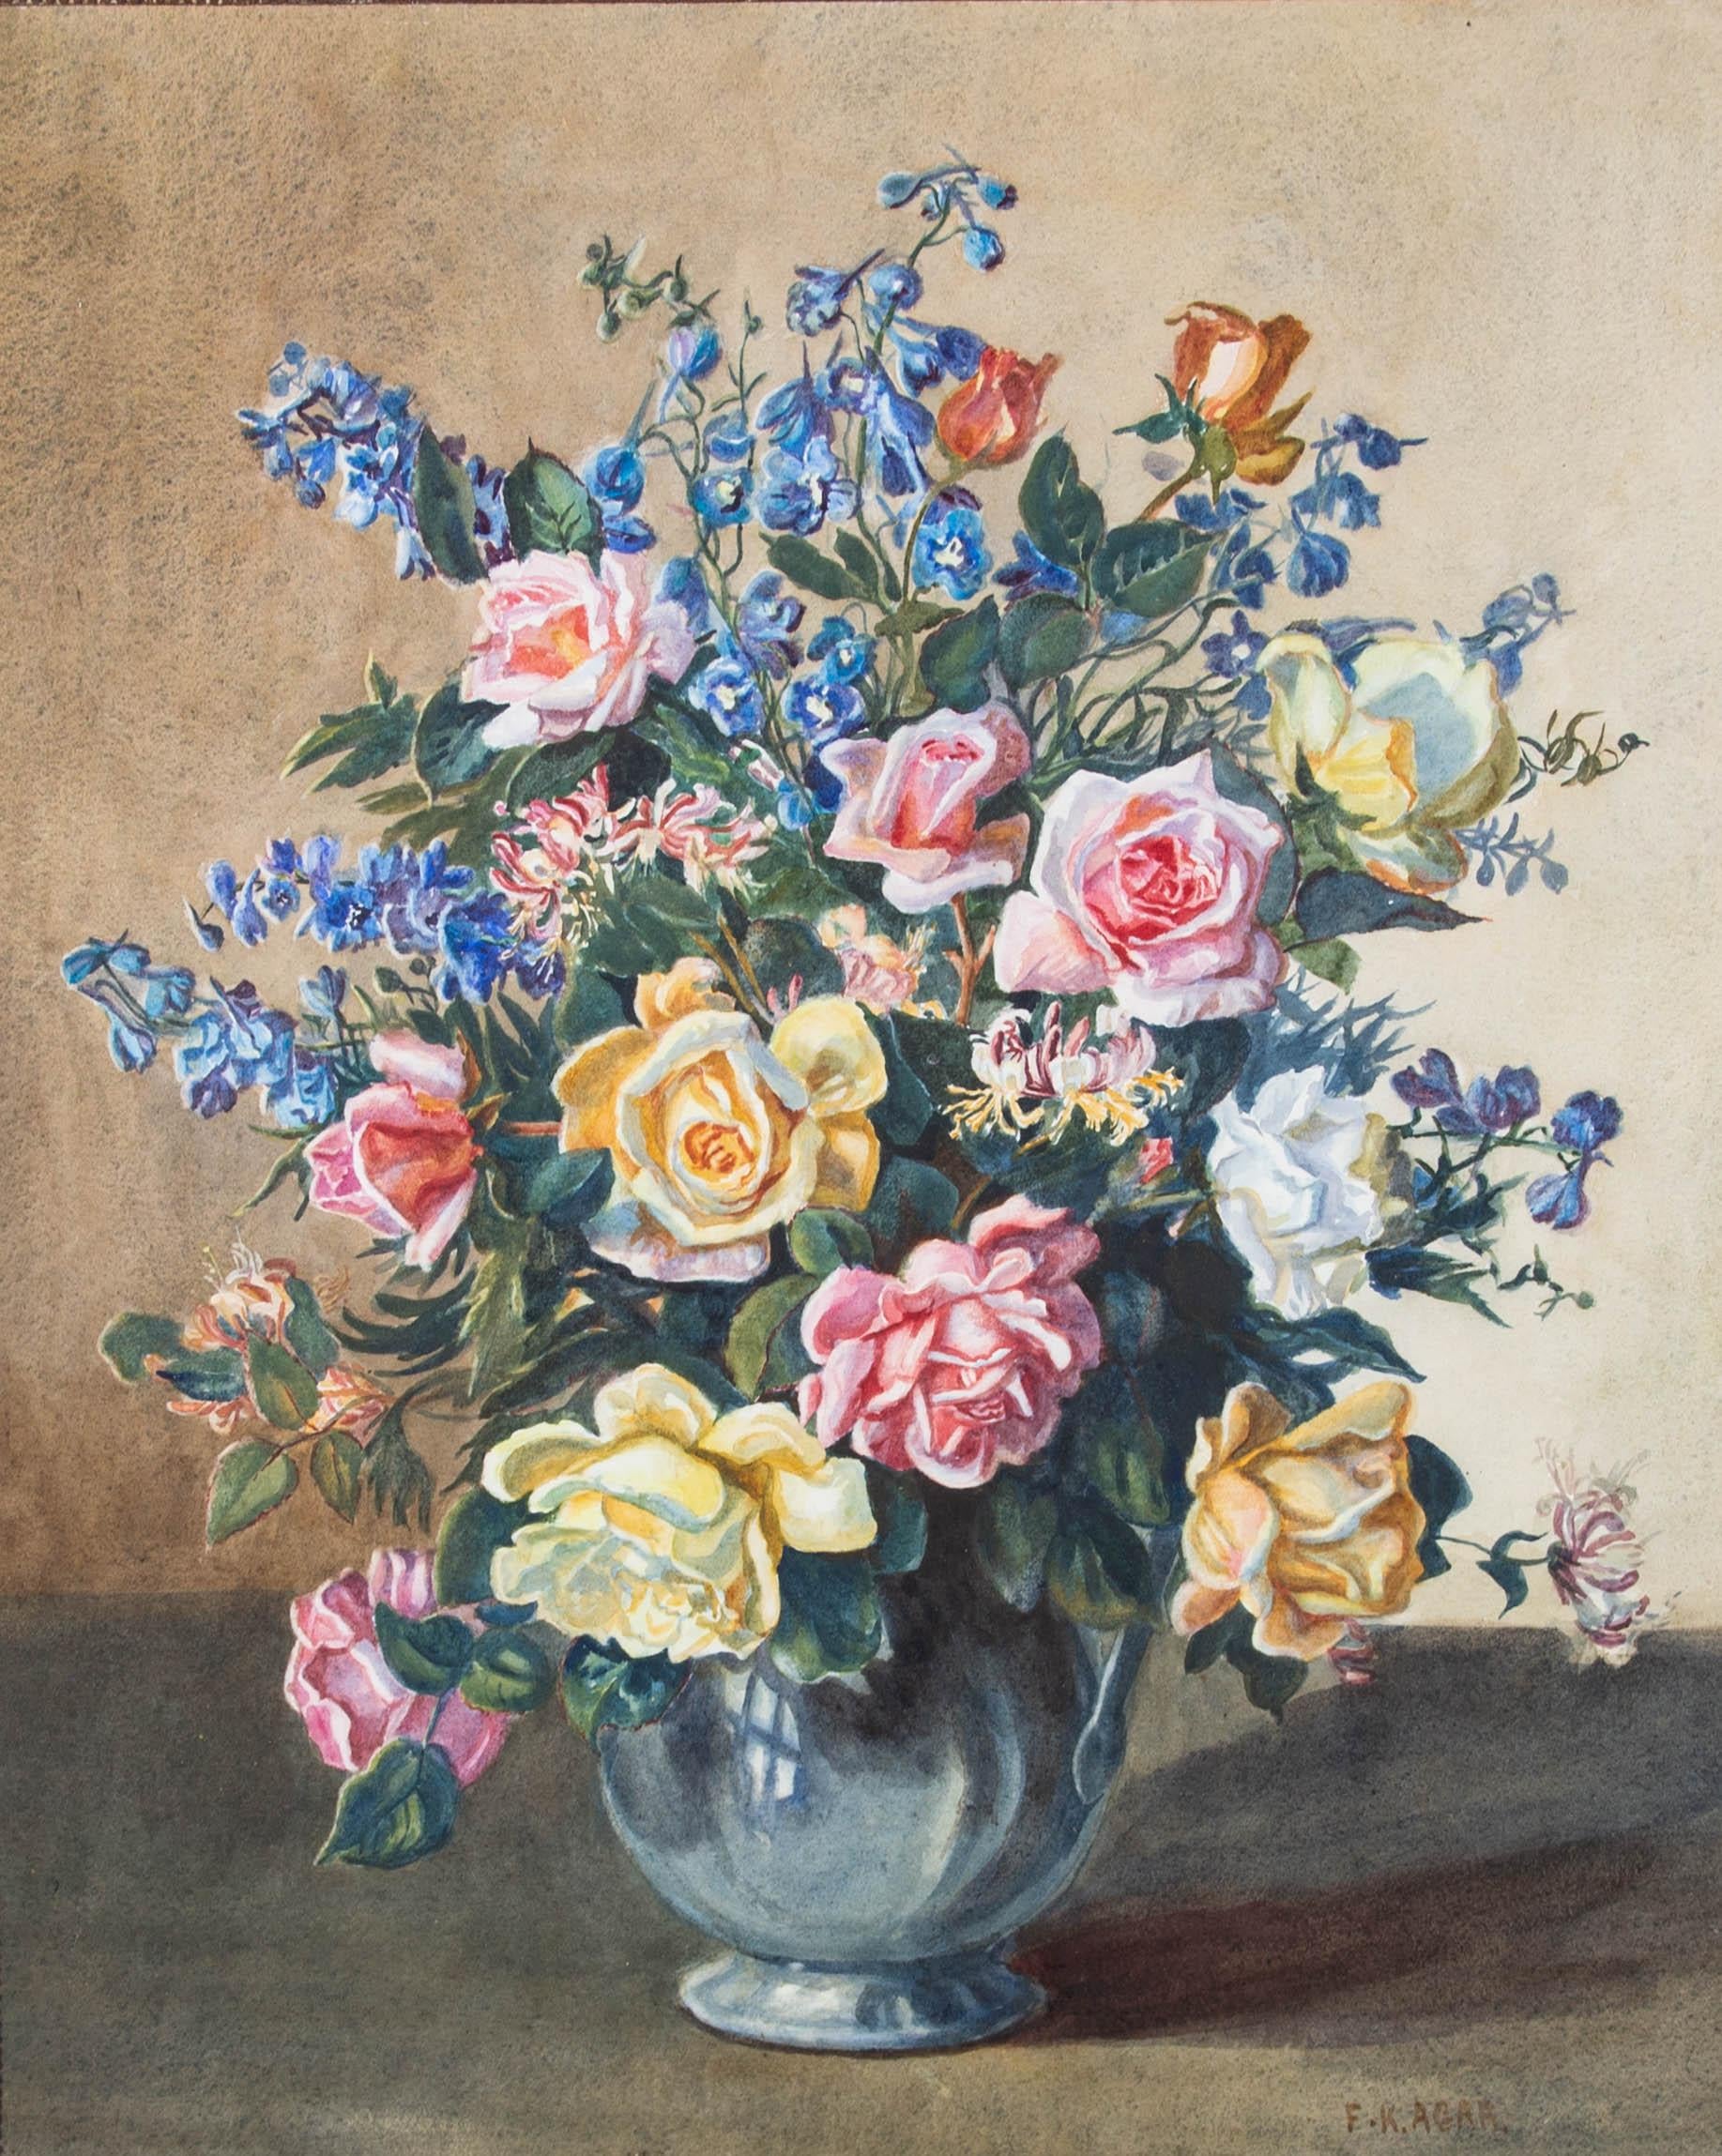 This delightful study depicts a decadent floral arrangement of roses, honey-suckle and salvia. The artist captured the flowers and blue vas in fine detail, bringing attention to the soft lighting on the delicate blooms. Signed to the lower right.